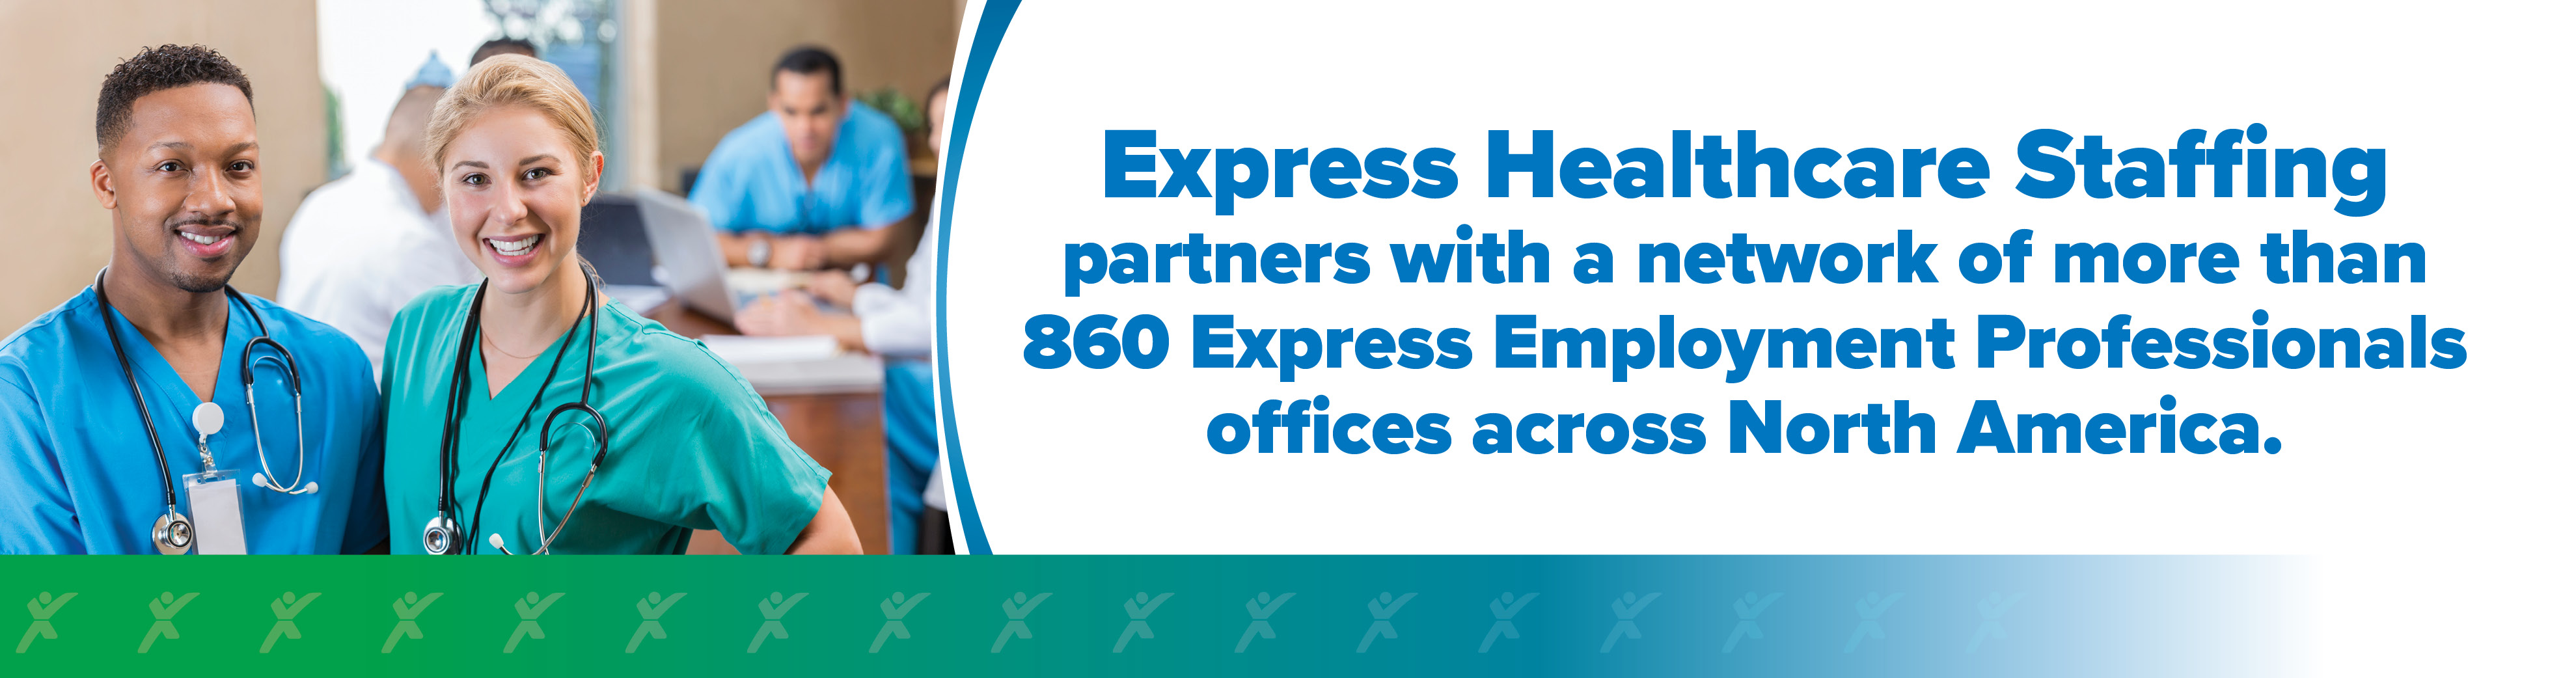 Express Healthcare Professionals partners with a networks of more than 860 Express Employment Staffing offices across North America